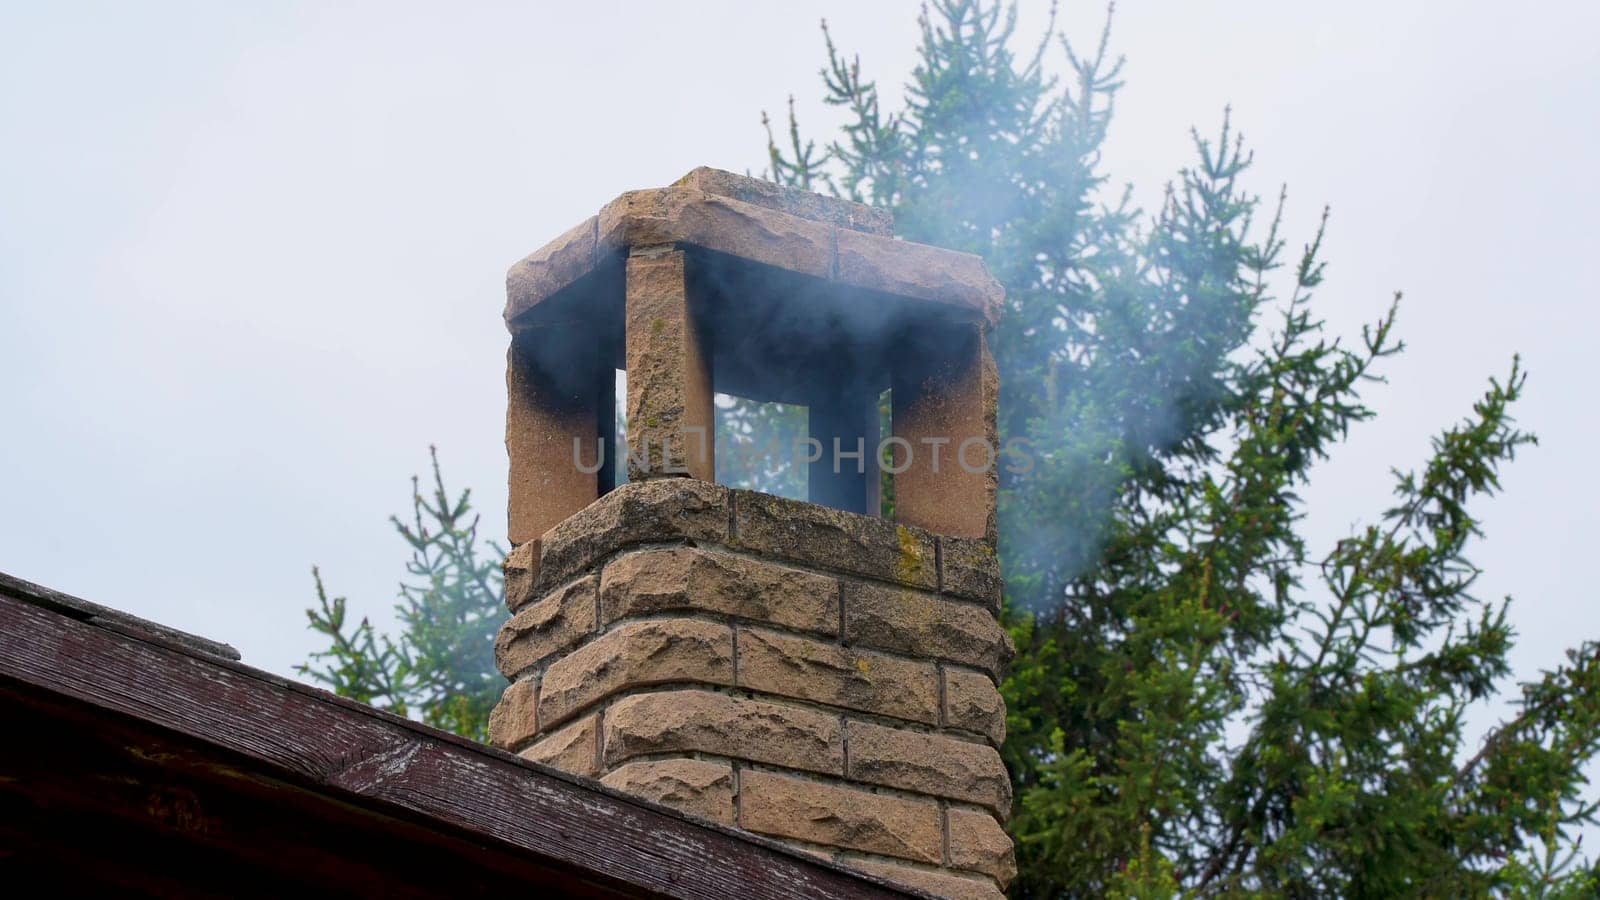 A residential building in the suburbs on a cloudy day in a cold winter pollutes the air with thick dark smoke. Smog coming out of the chimney.